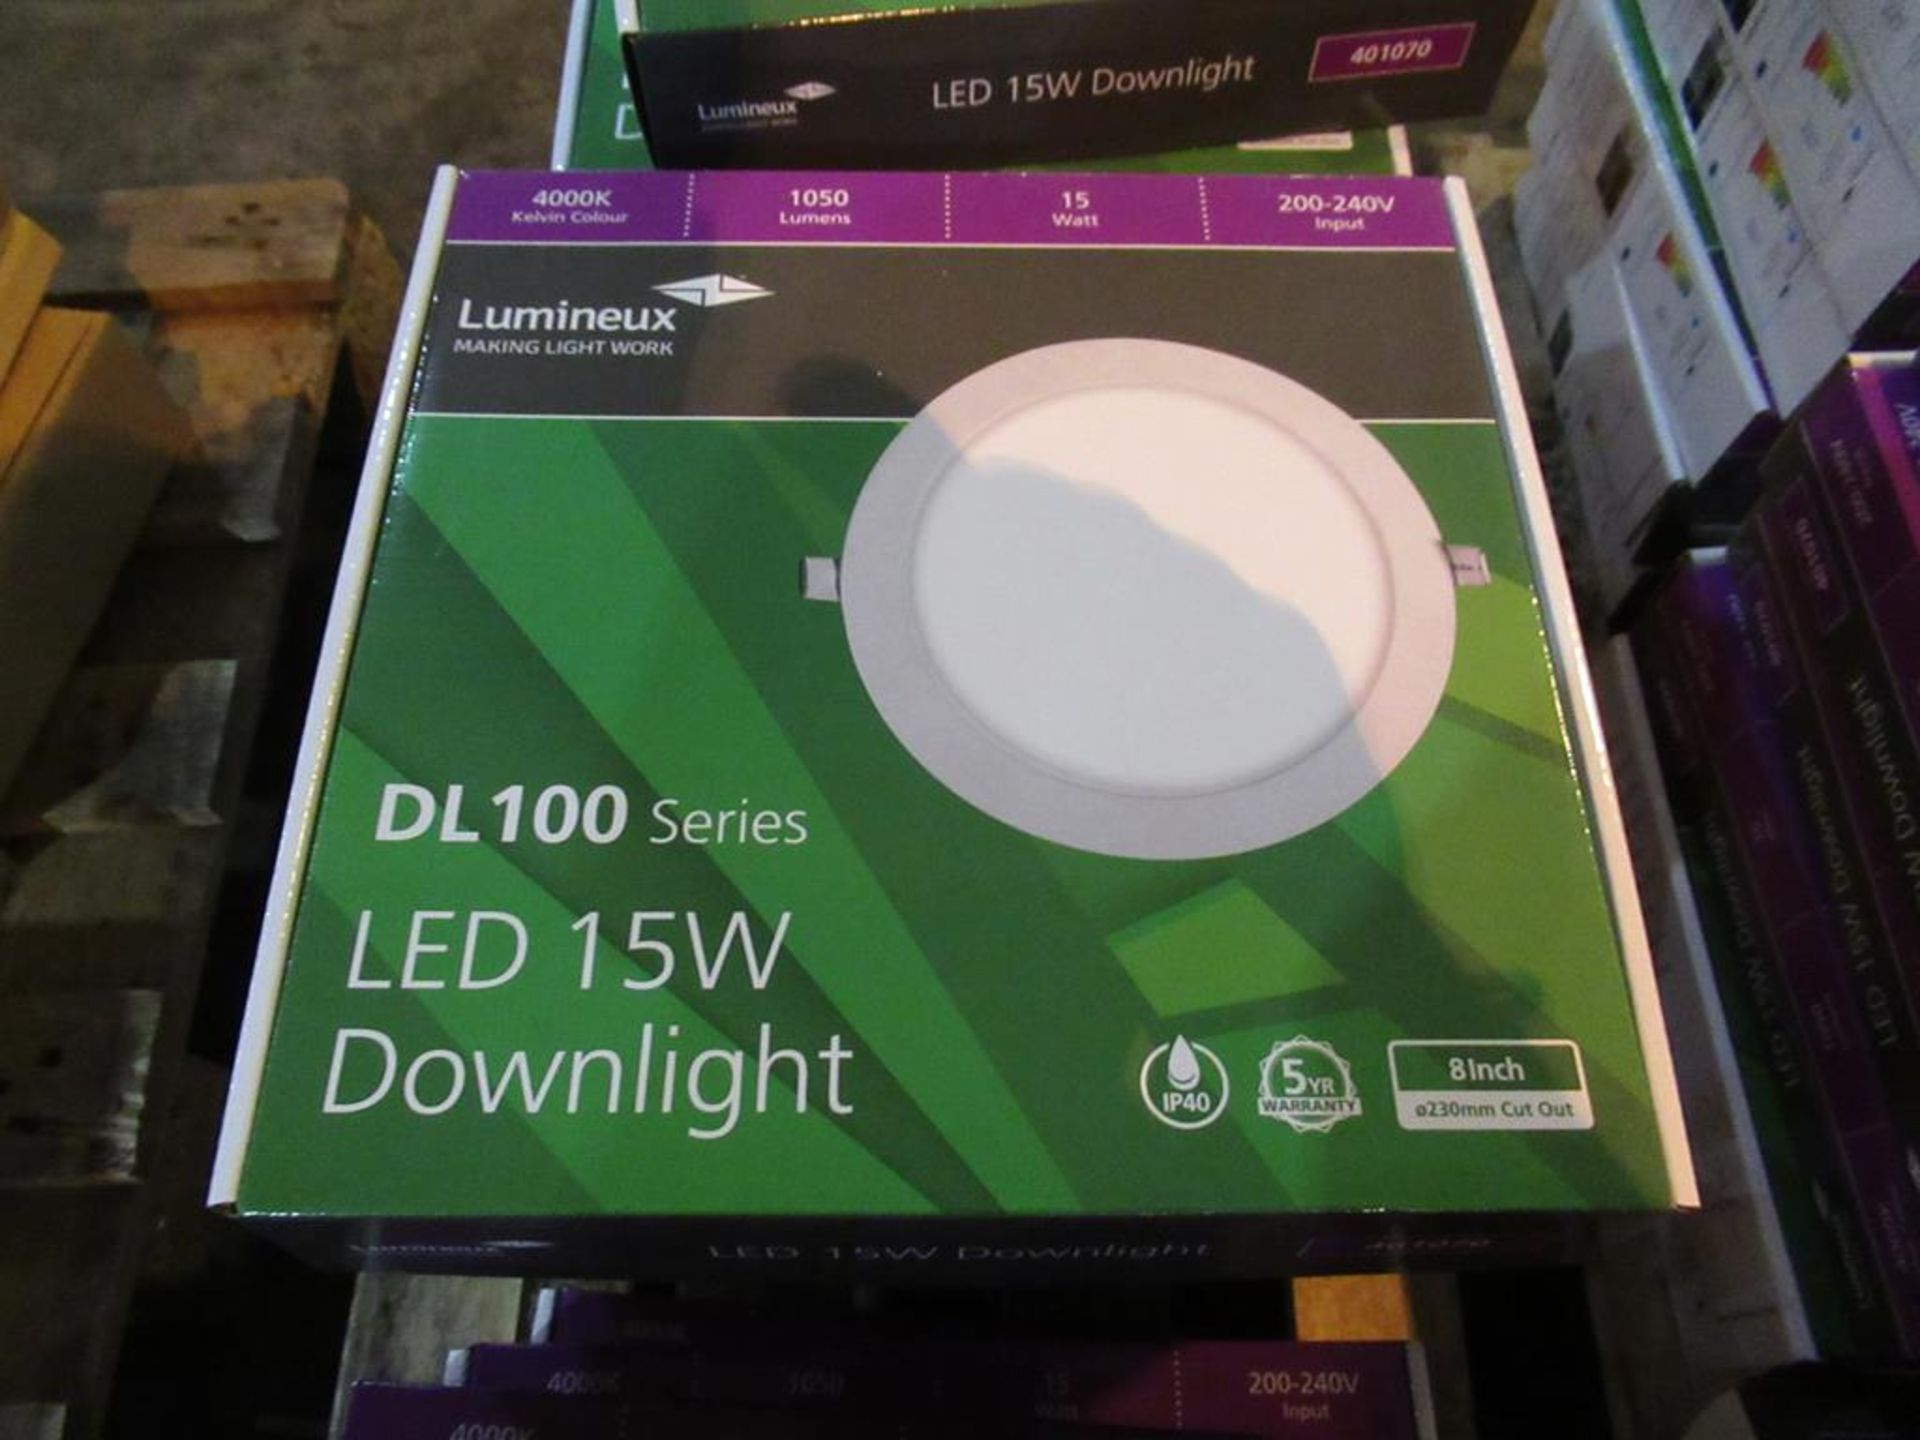 18 x Lumineux 15W Downlight 4000K 200-240V No Drivers OEM Trade Price £ 360 - Image 3 of 3